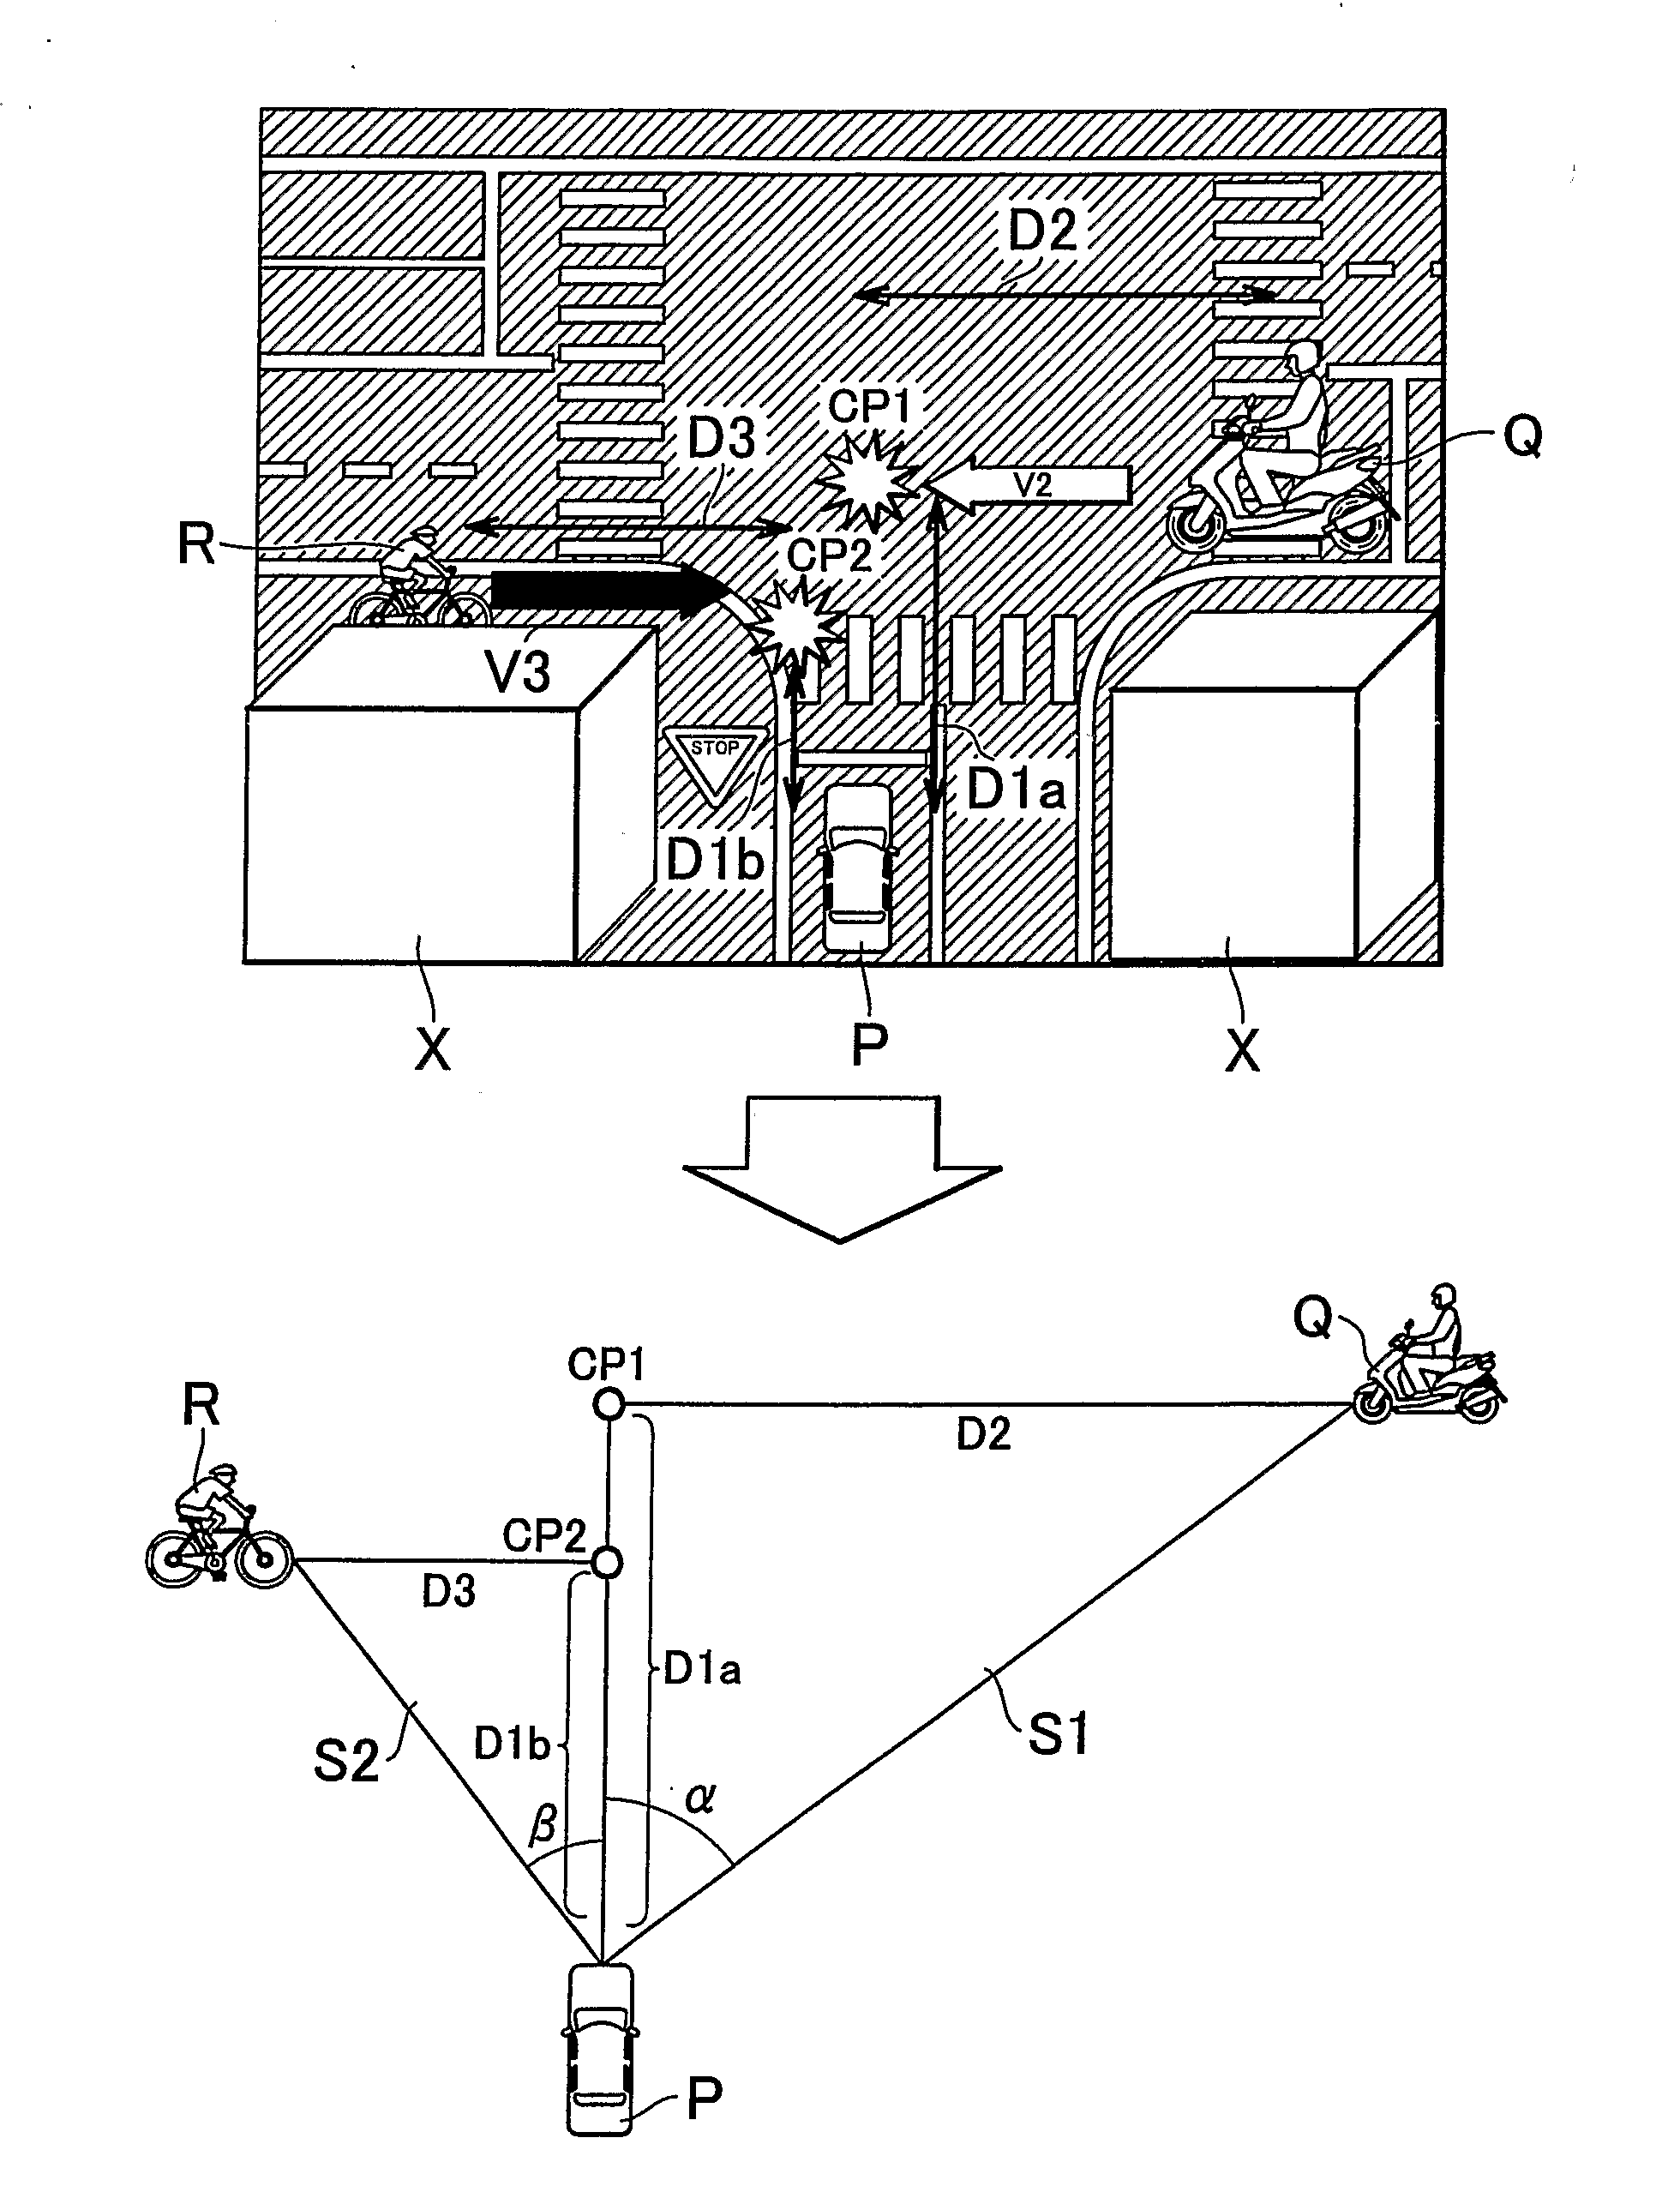 Intersection visibility determination device, vehicle with intersection visibility determination device, and method for determining intersection visibility